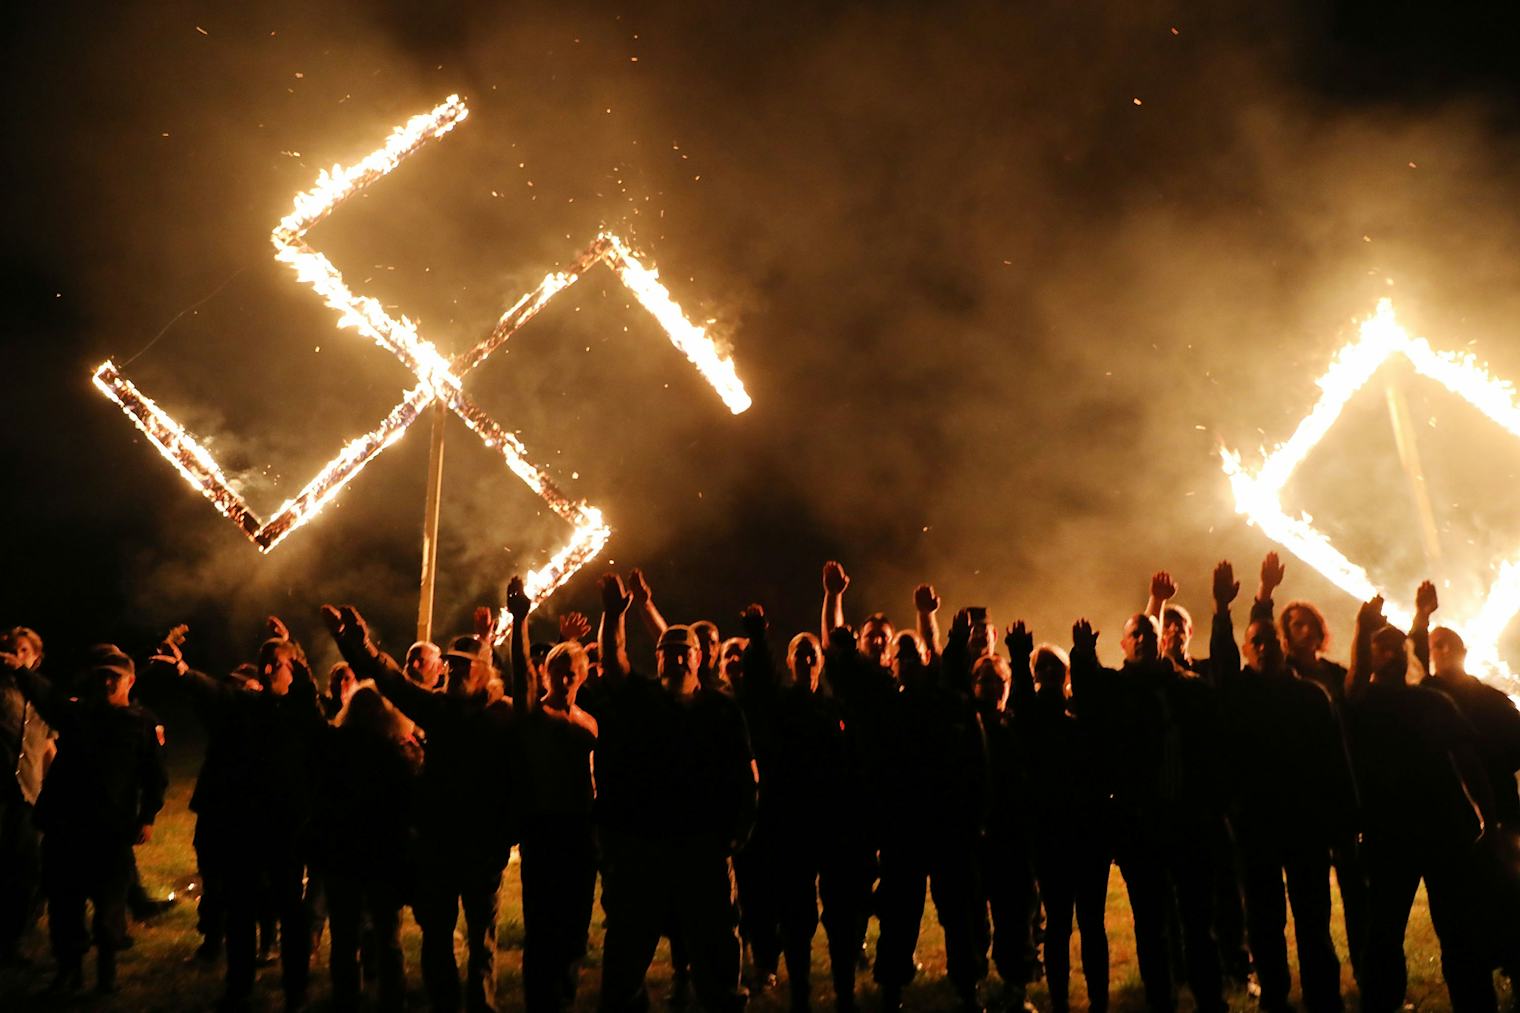 Right Wing Extremism Has Risen Significantly Under Trump A New Analysis Finds